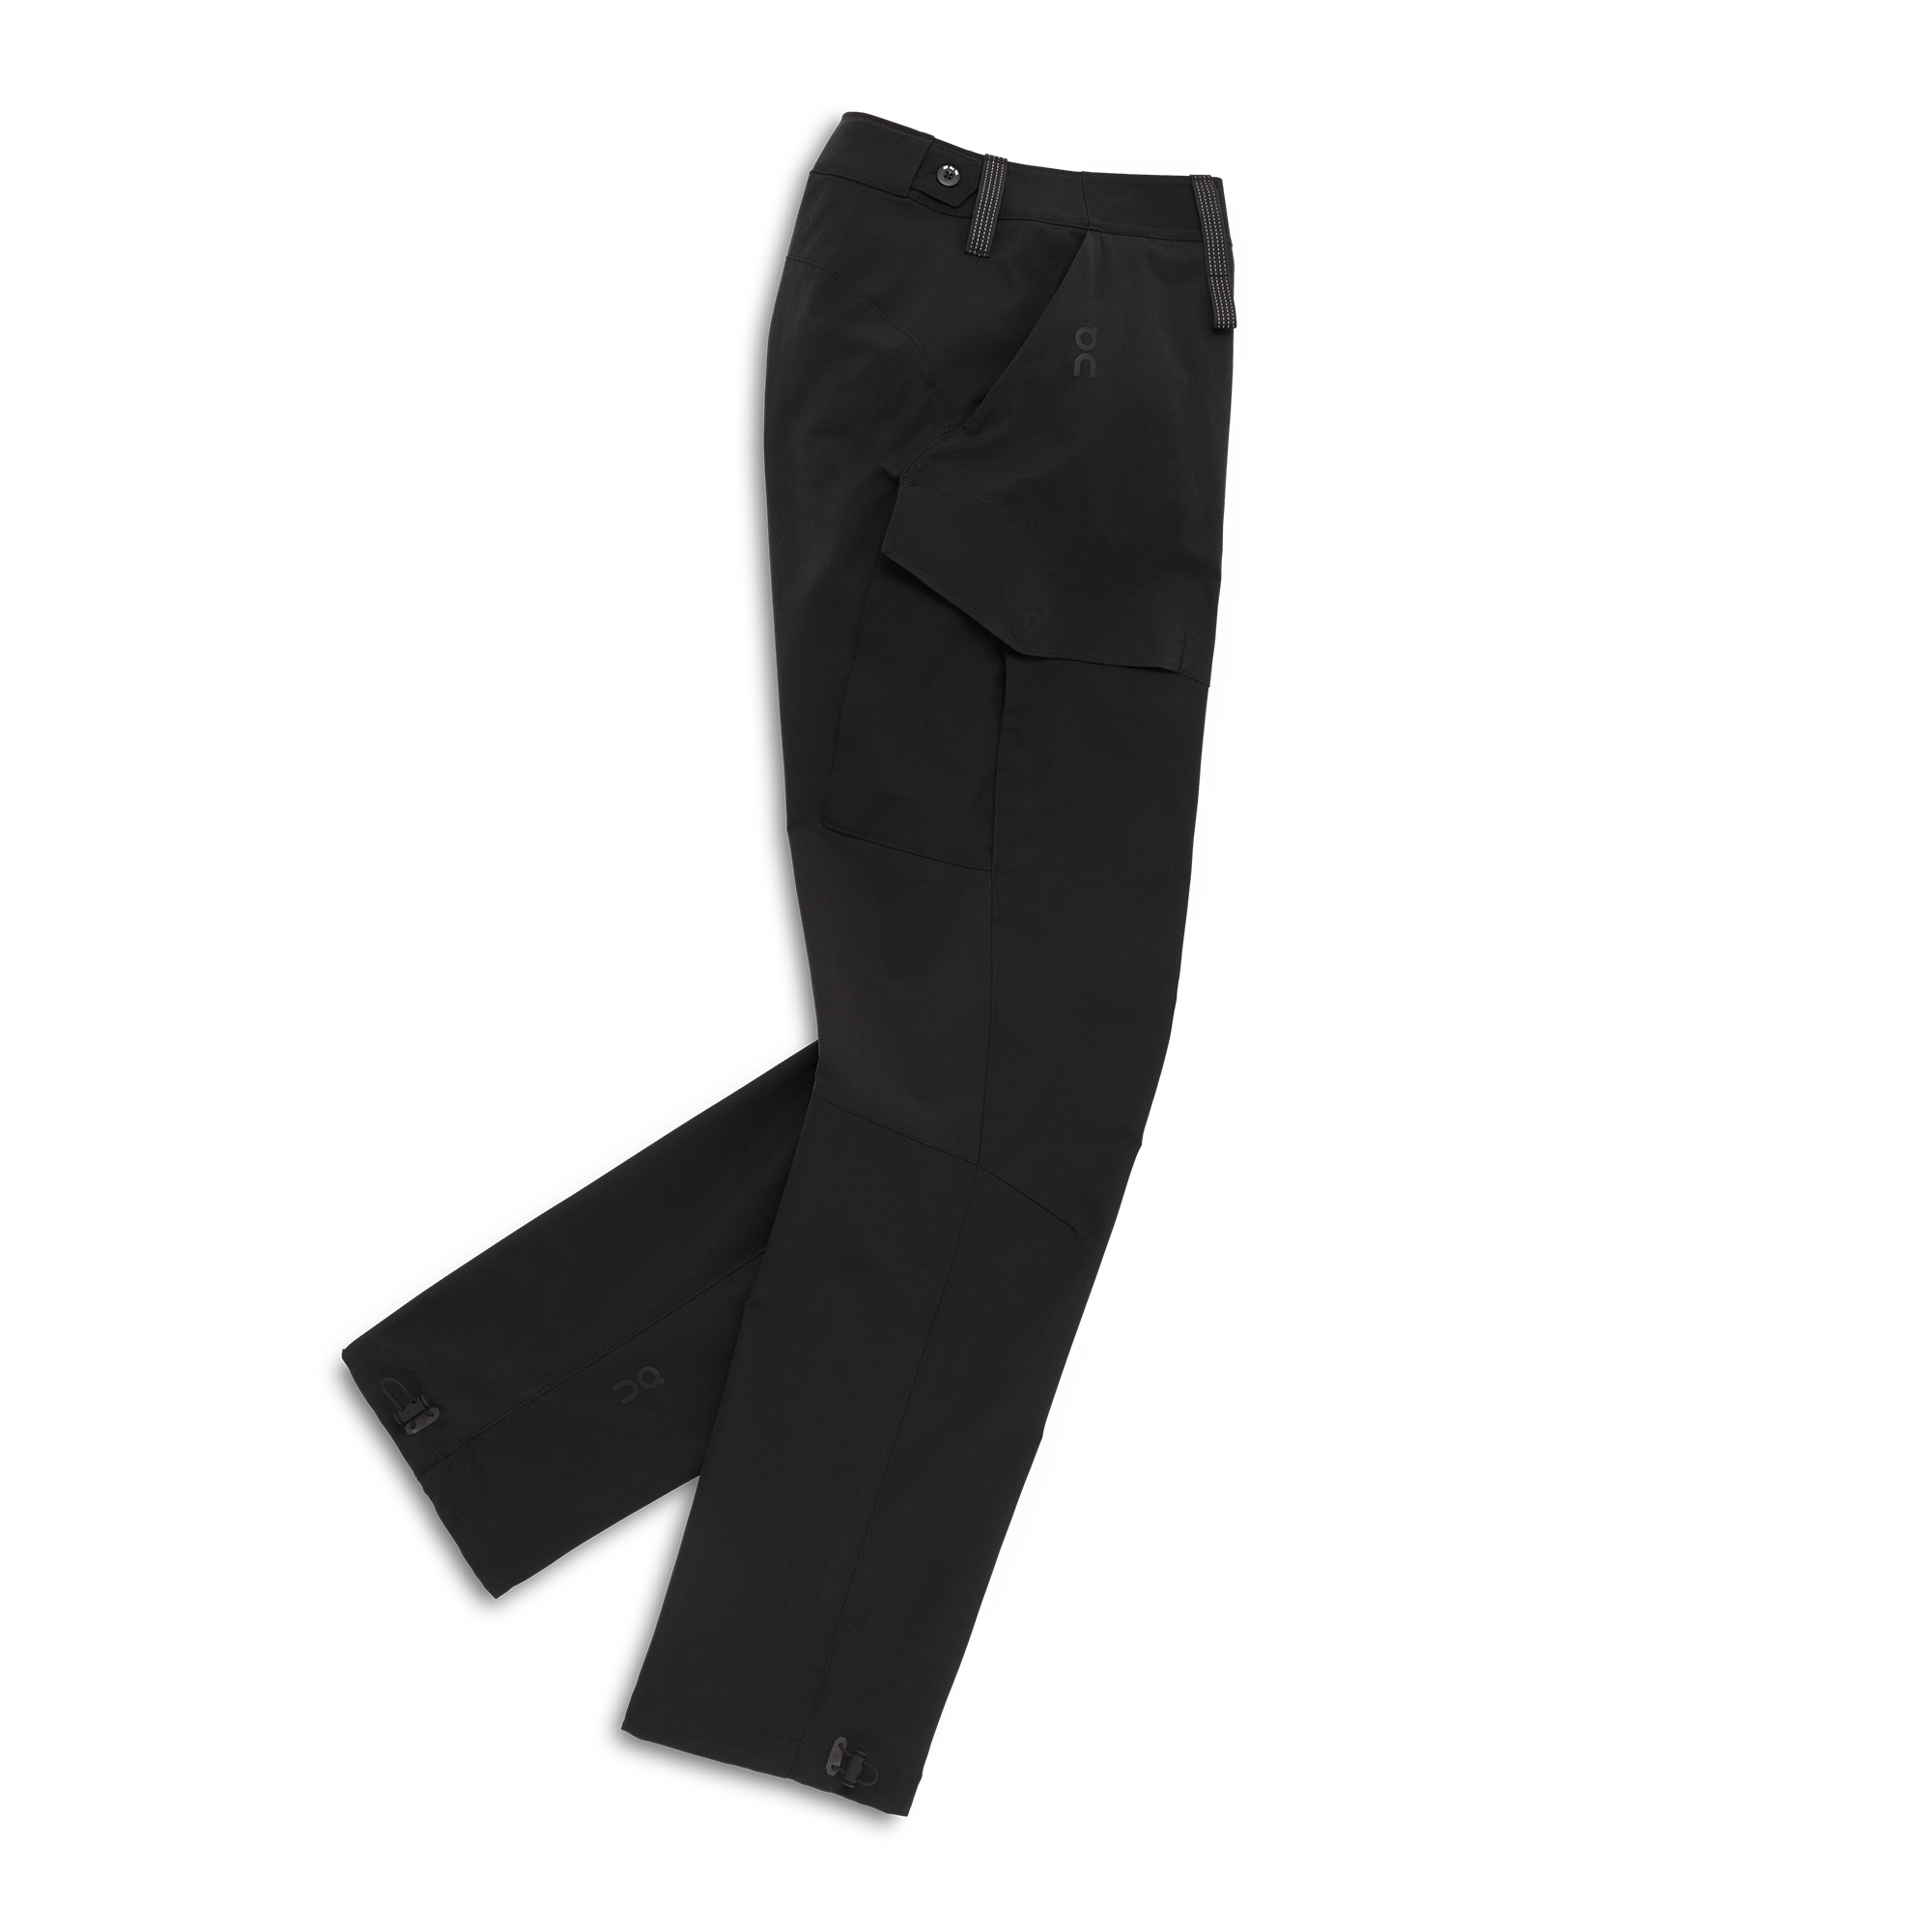 Get Ready for Fall Adventures: BN001 Hiking Pants Autumn Restock